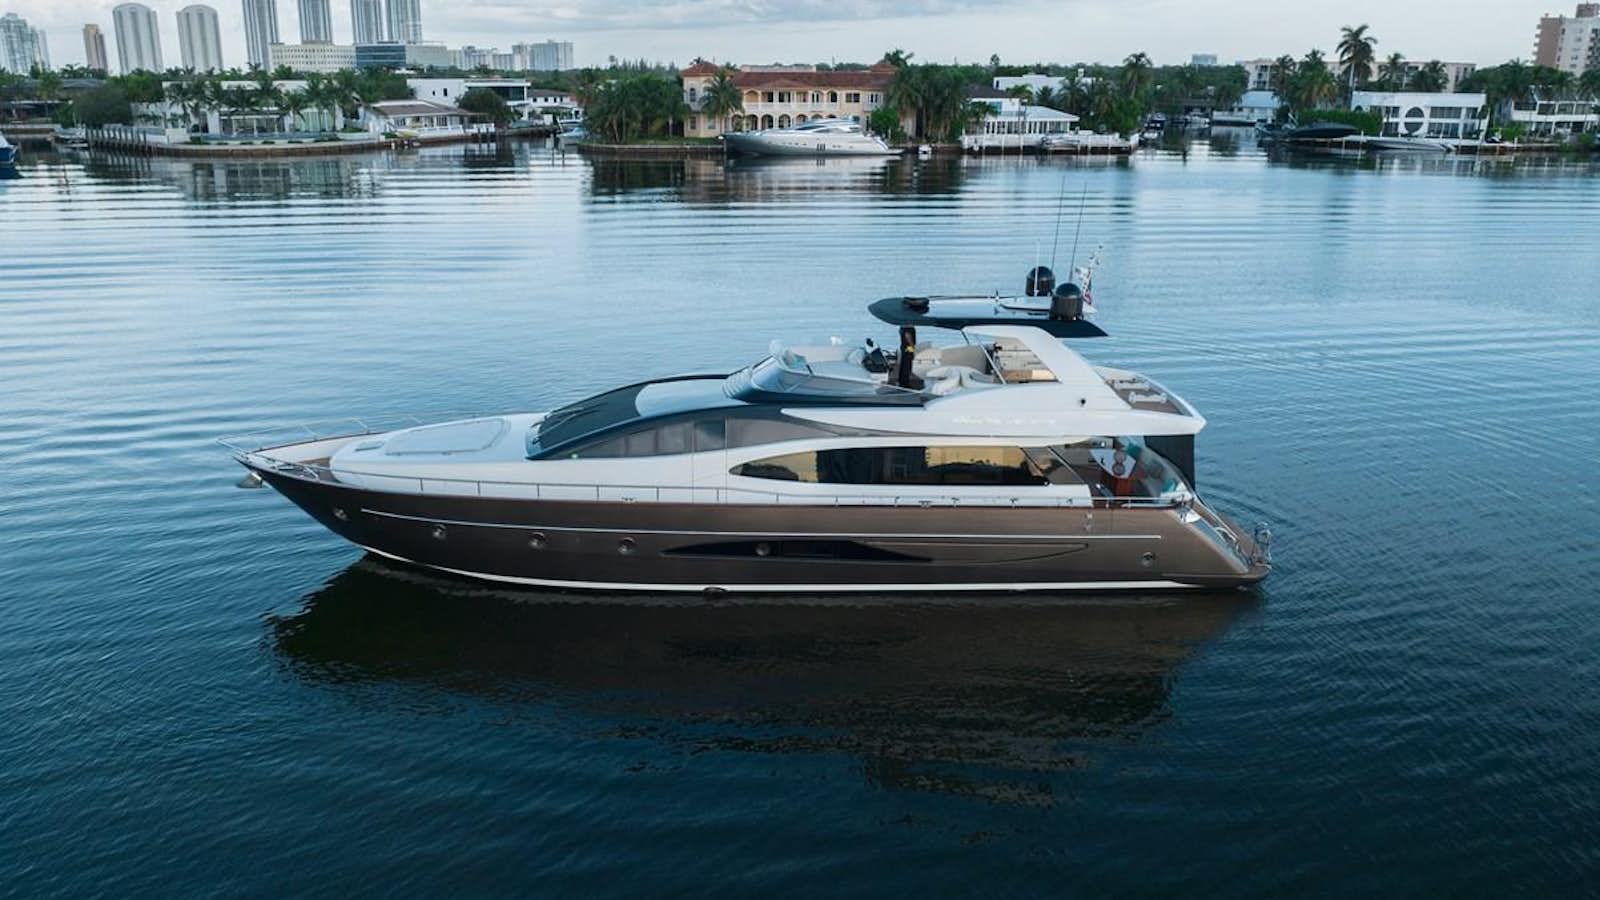 75' riva 2012
Yacht for Sale